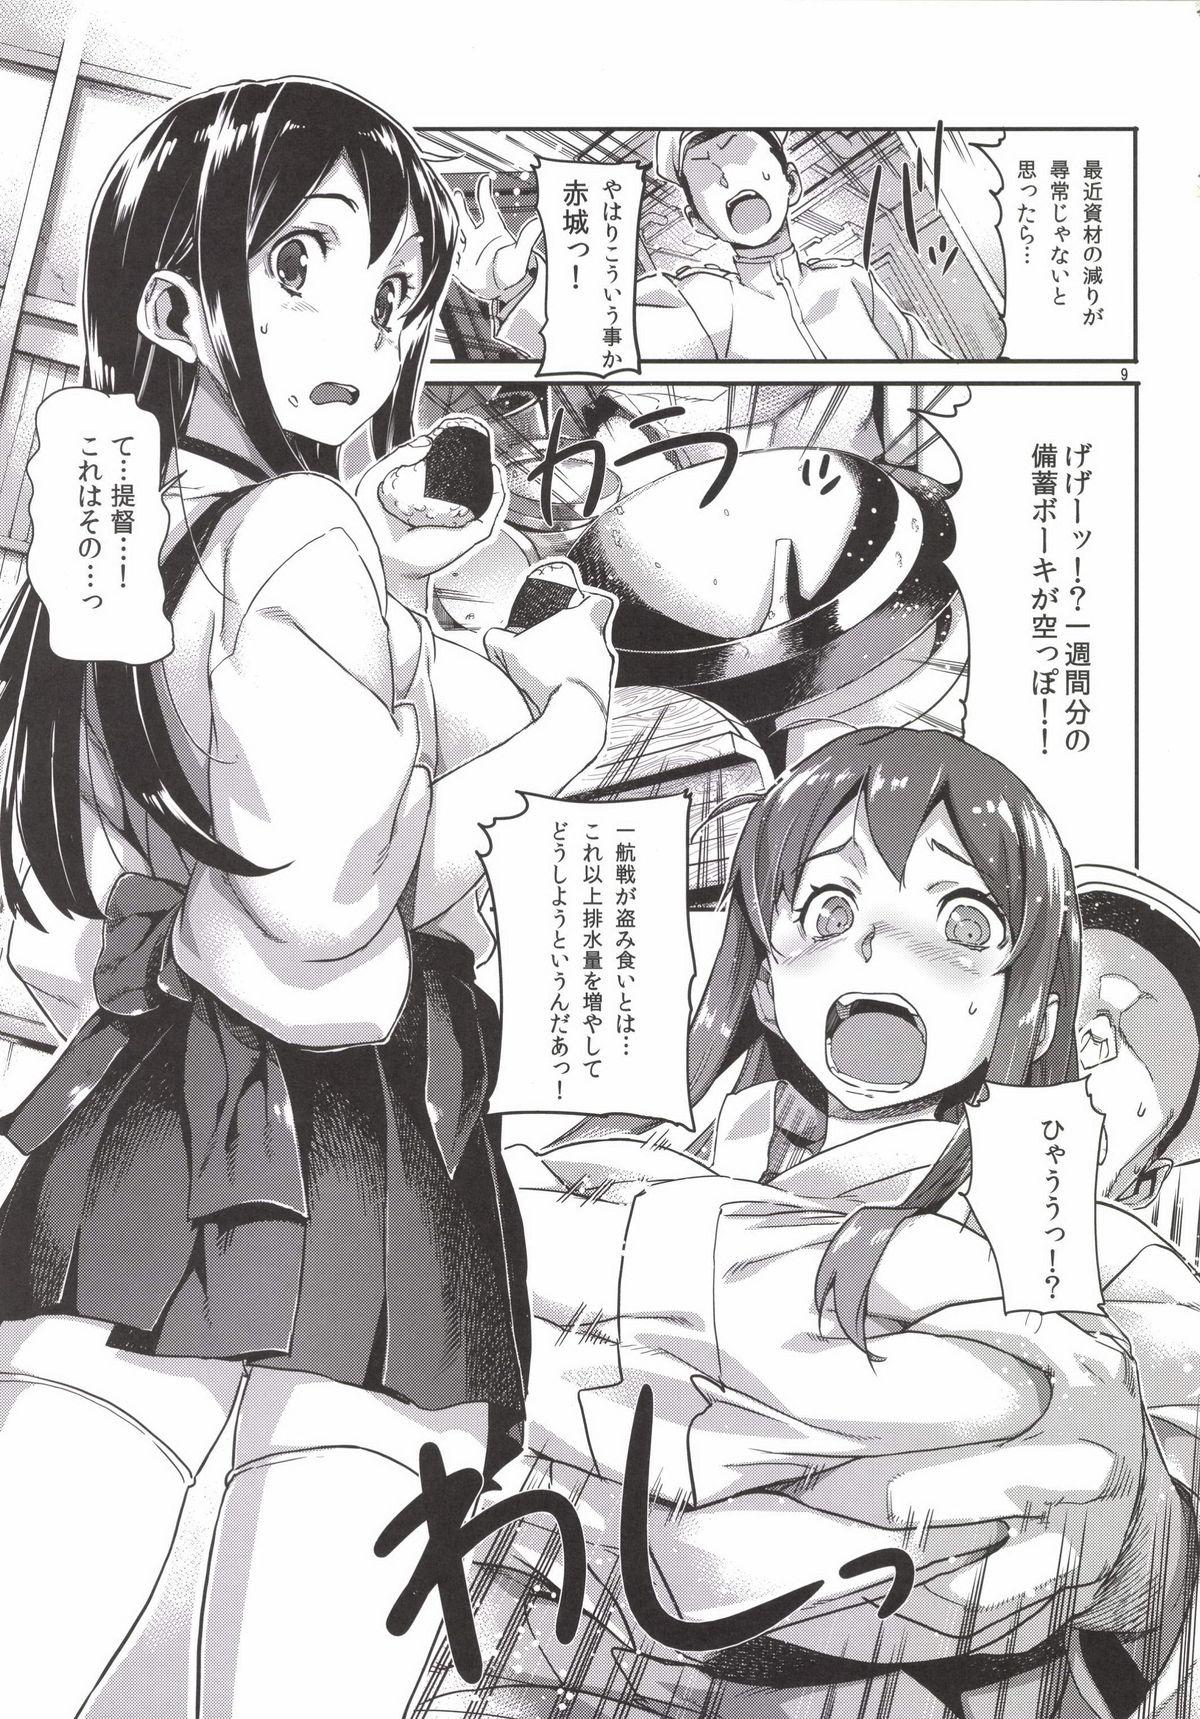 Reverse KanColle - Kantai collection Yanks Featured - Page 11